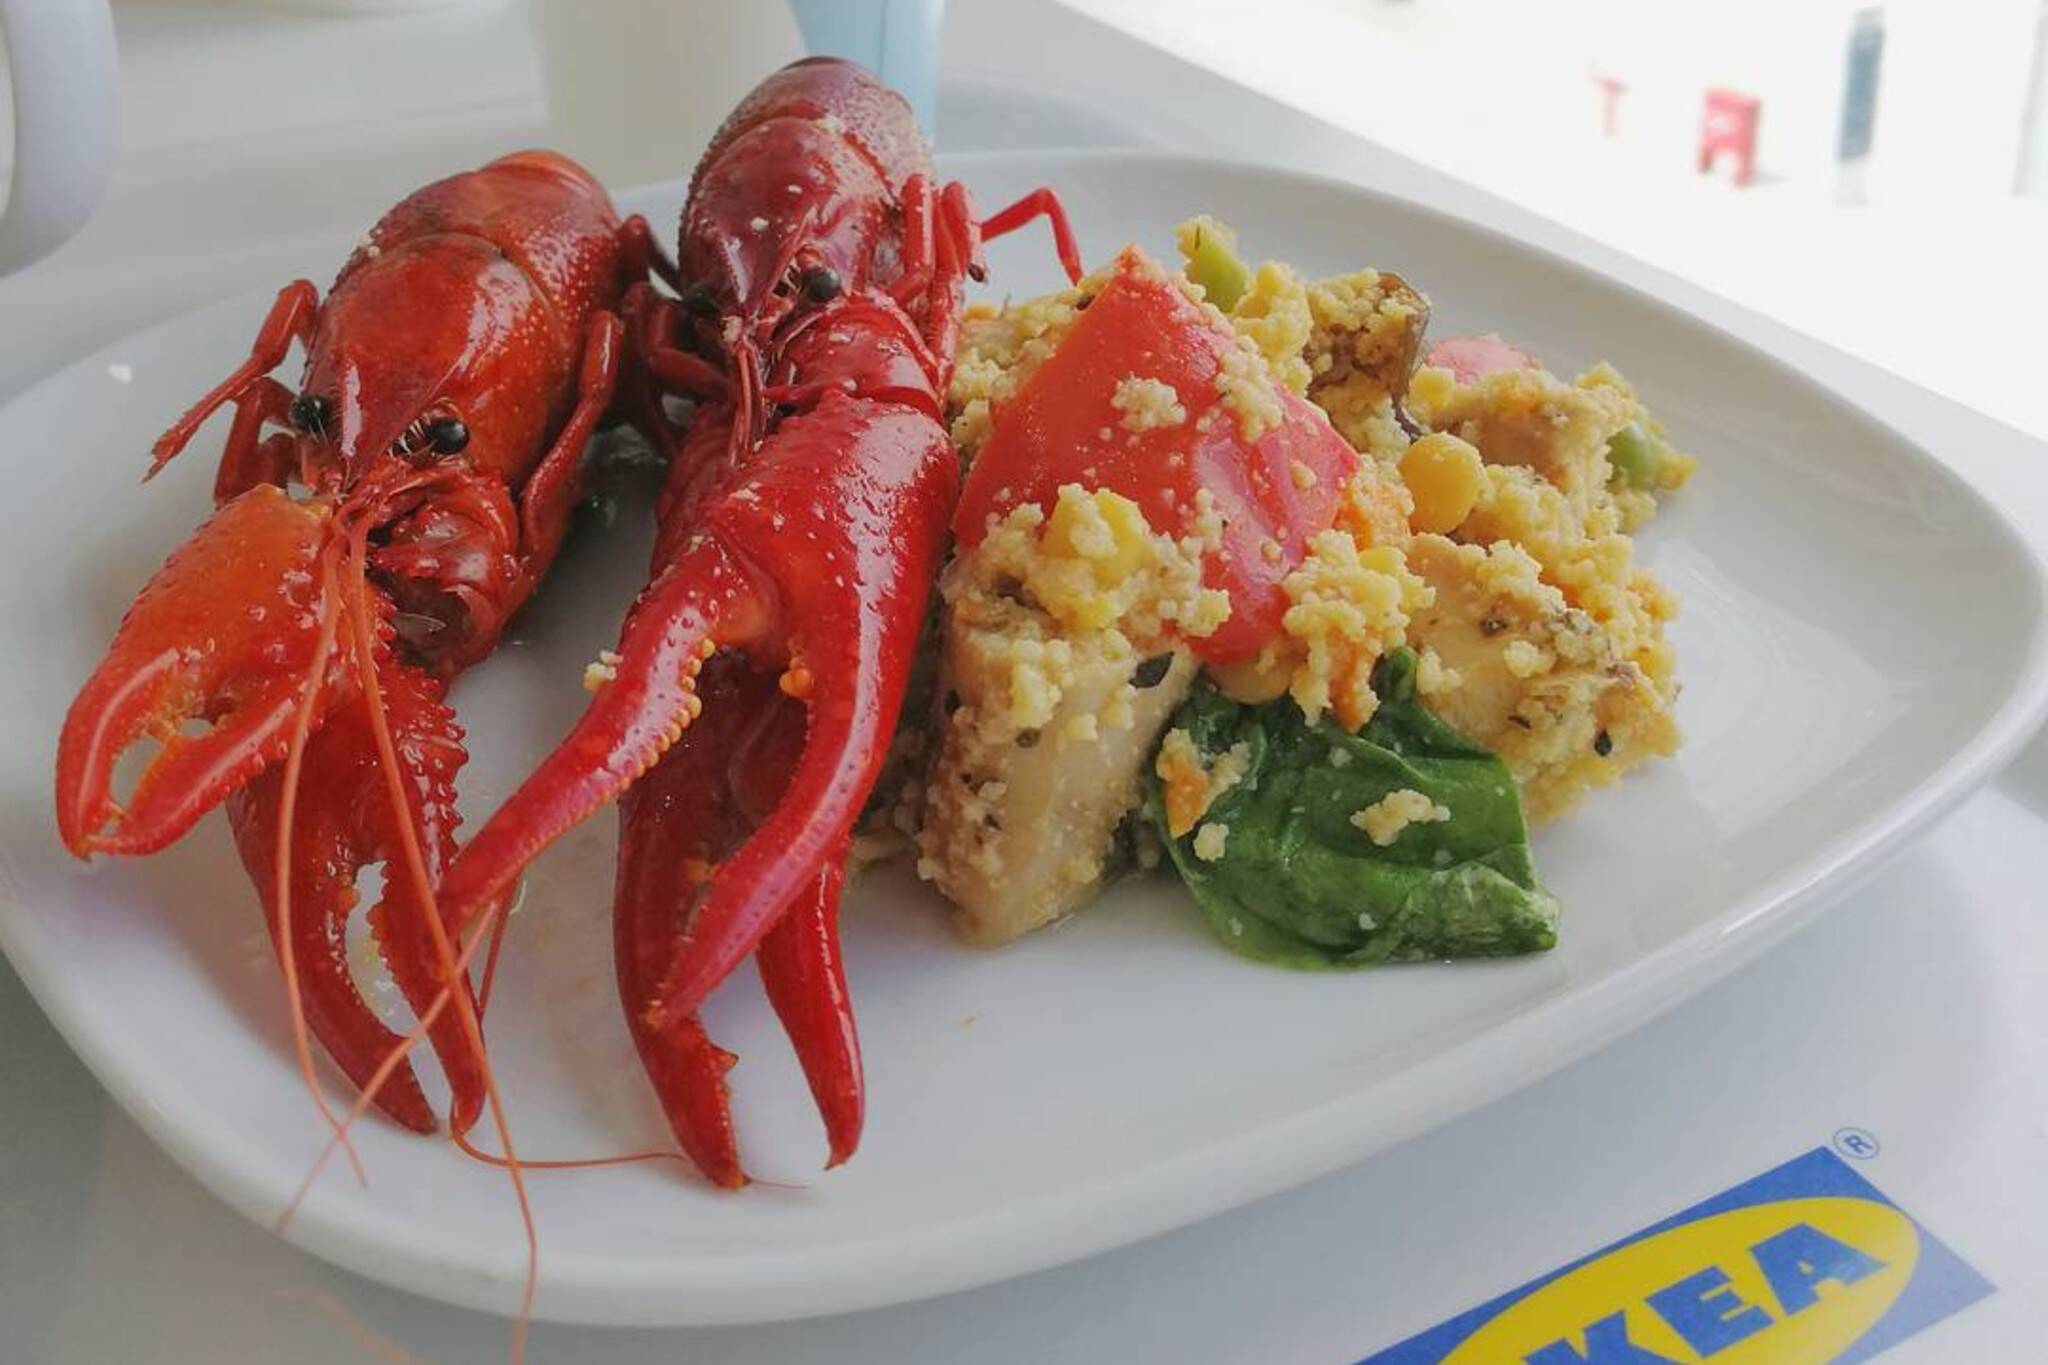 IKEA is offering an allyoucaneat seafood buffet in Toronto